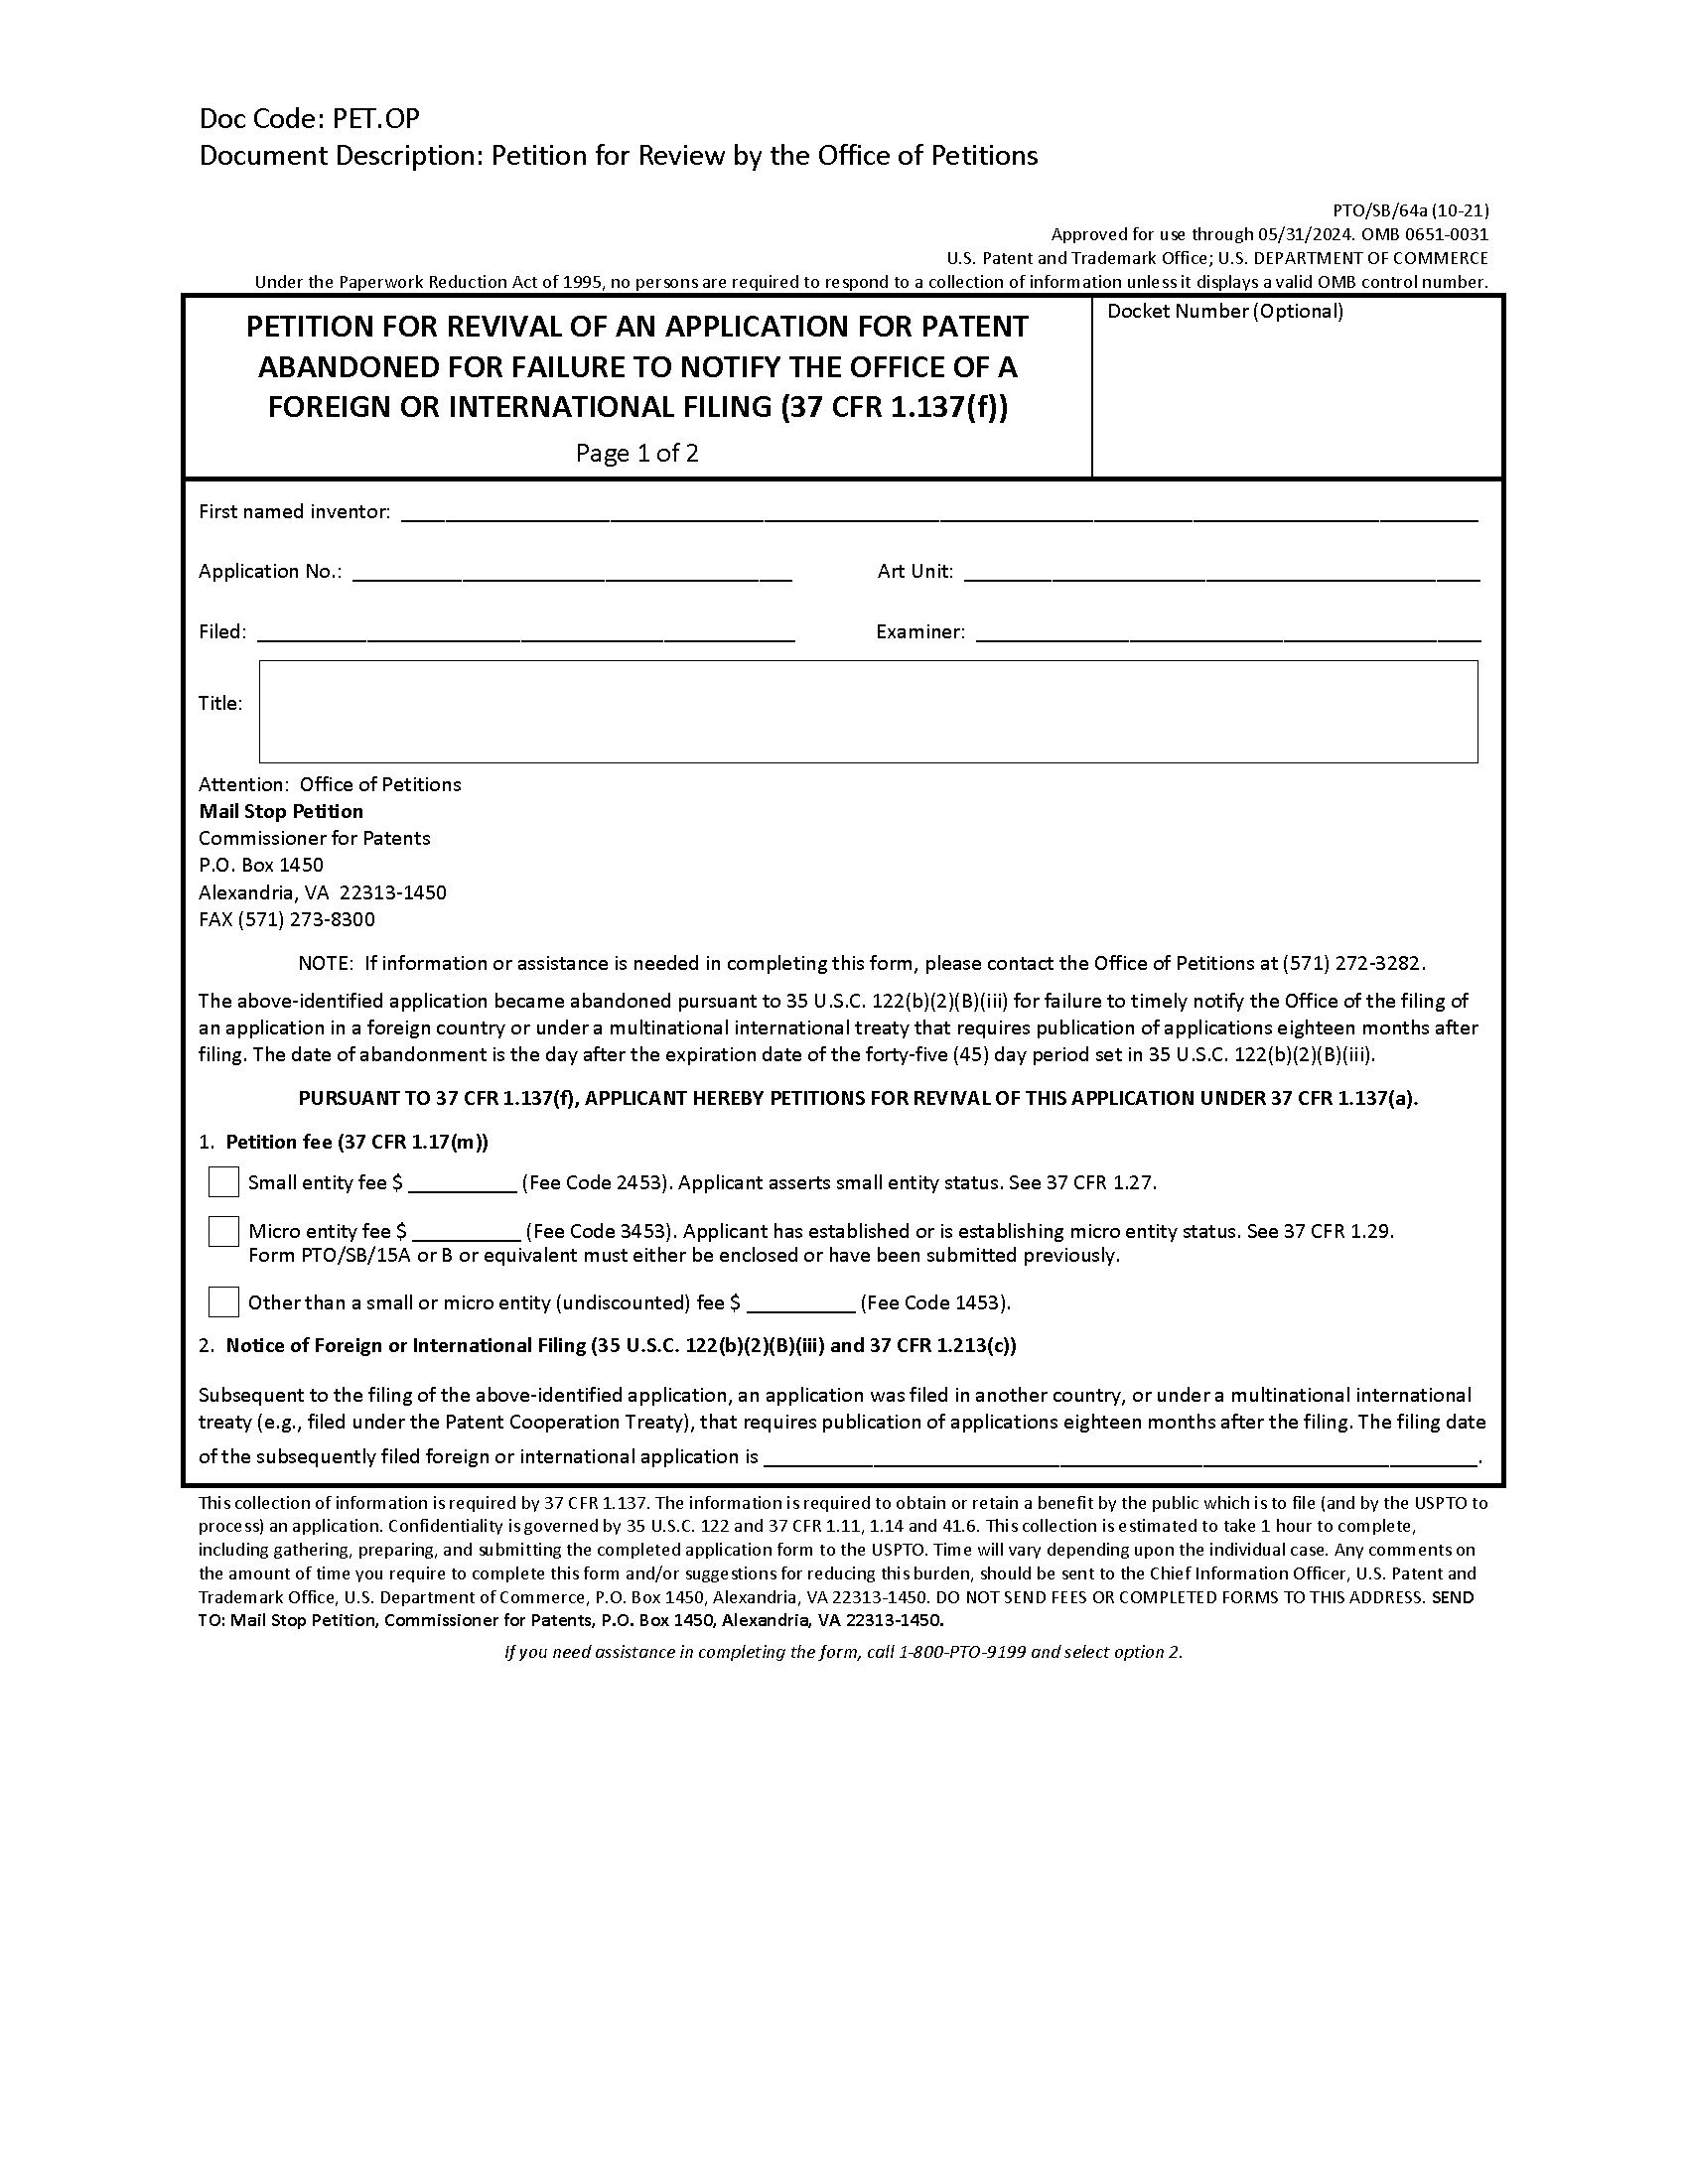 Form PTO/SB/64a Petition for Revival of an Application for Patent Abandoned for Failure To Notify the Office of a Foreign or International Filing (37 CFR 1.137(f)). [Page 1 of 2]